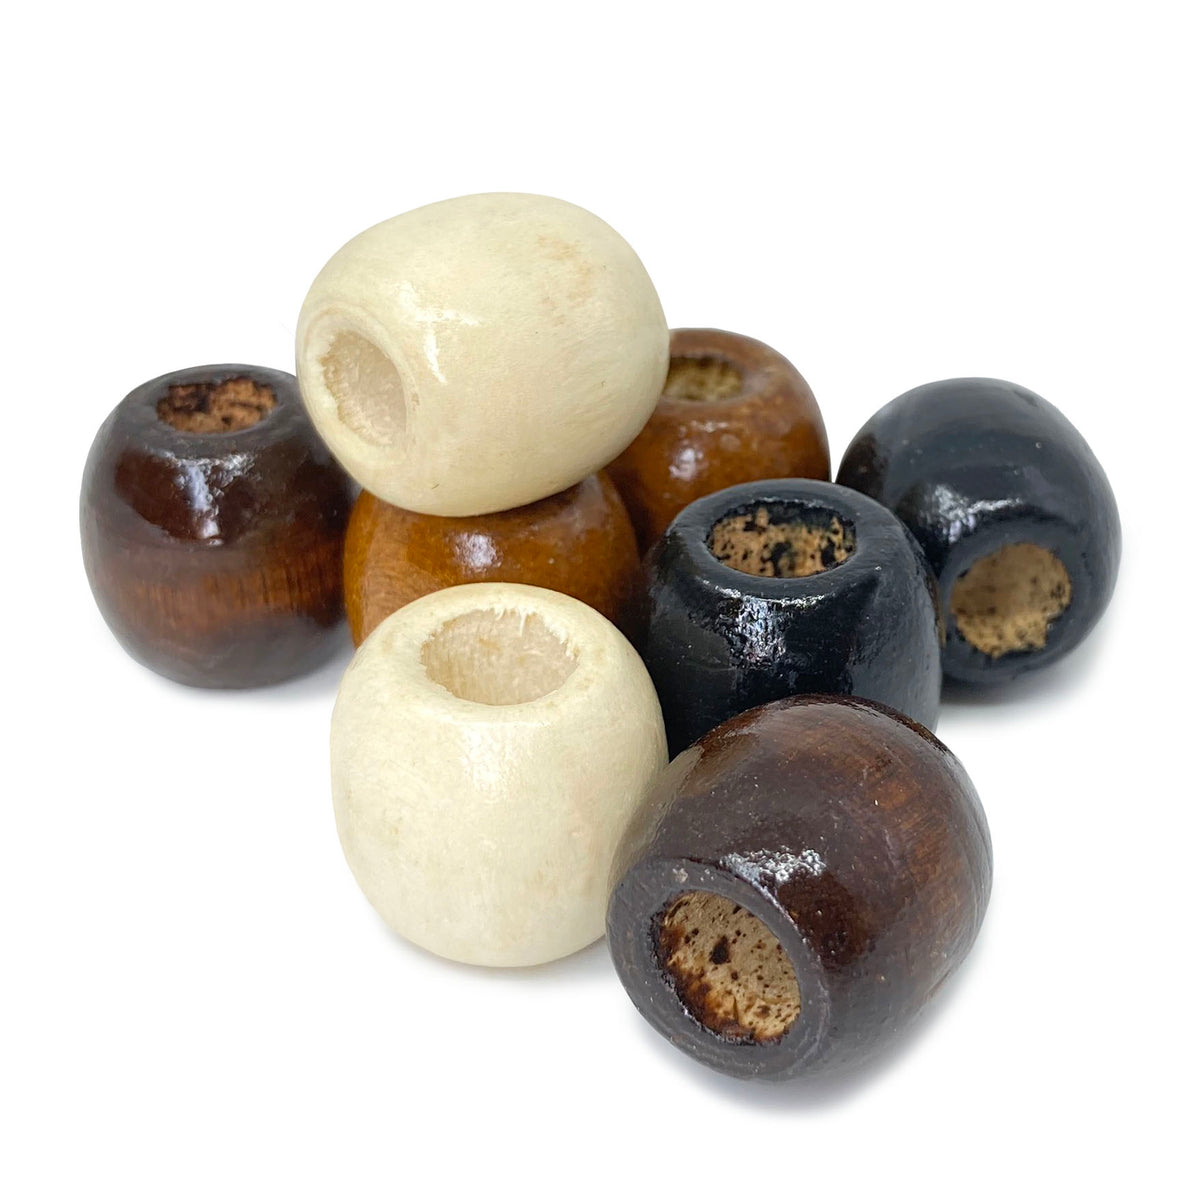 200 Multicolor Naturals Brown, Dark Brown, Black, Ivory Macrame Wood Beads 17mm with 7mm Large Hole